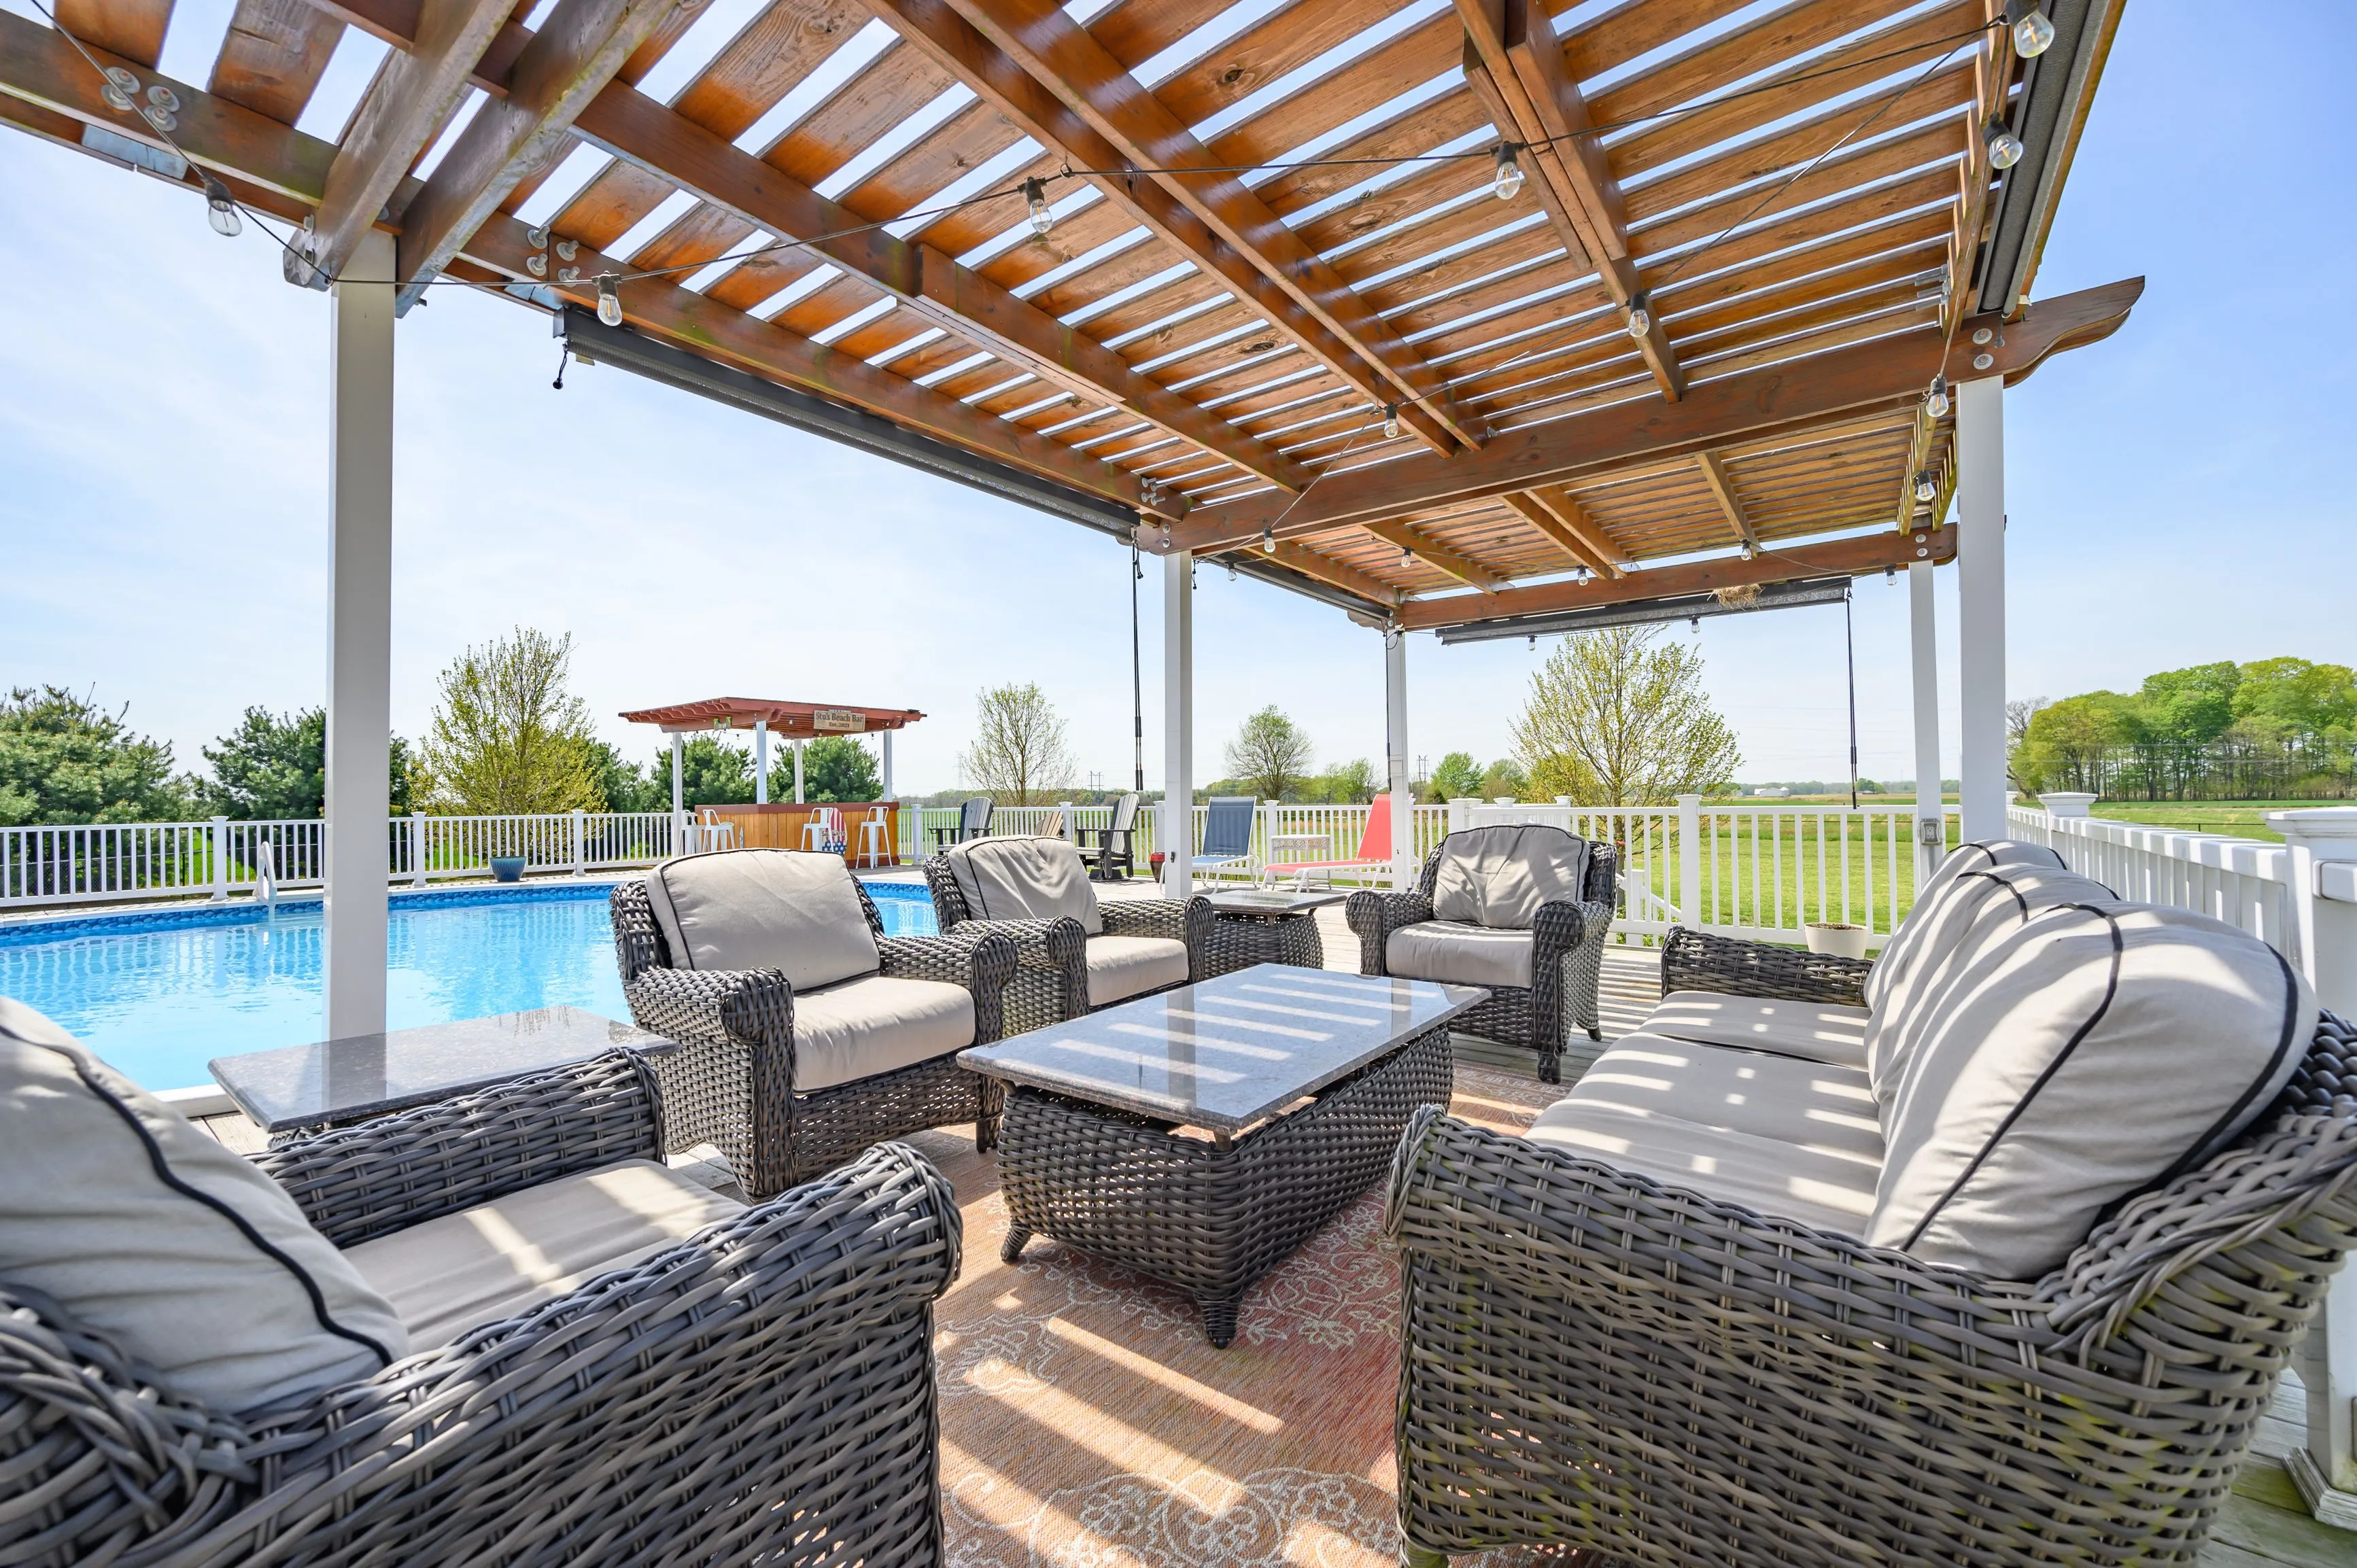 Outdoor patio area with rattan furniture under a pergola, overlooking a swimming pool on a sunny day.